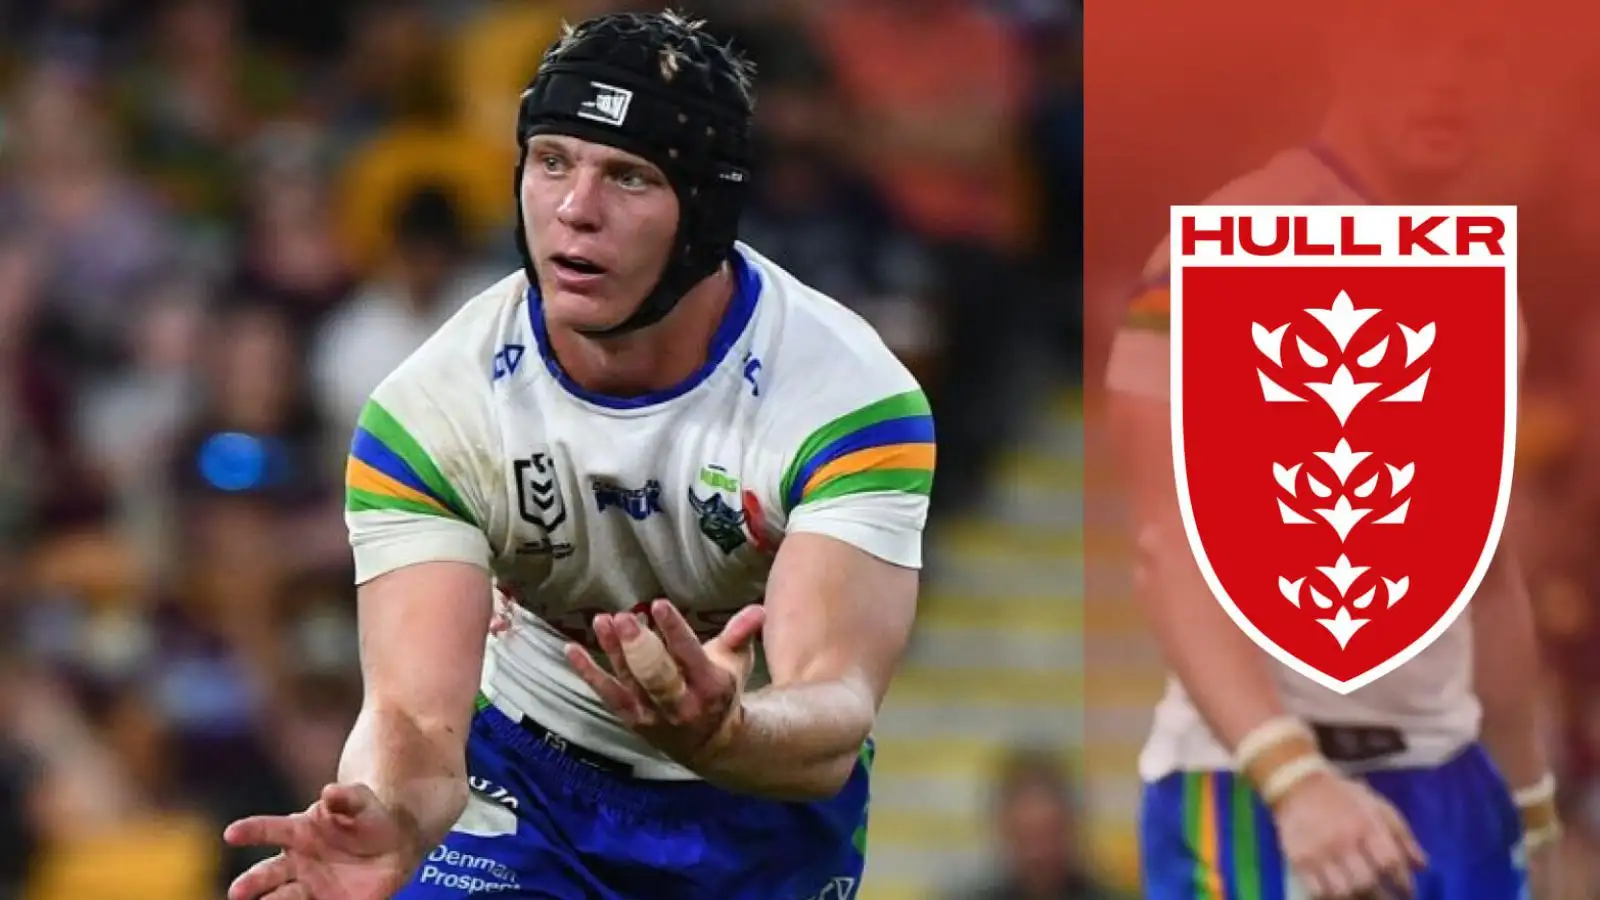 Hull KR transfer news: New recruit Brad Schneider on what stood out to him after Willie Peters chat